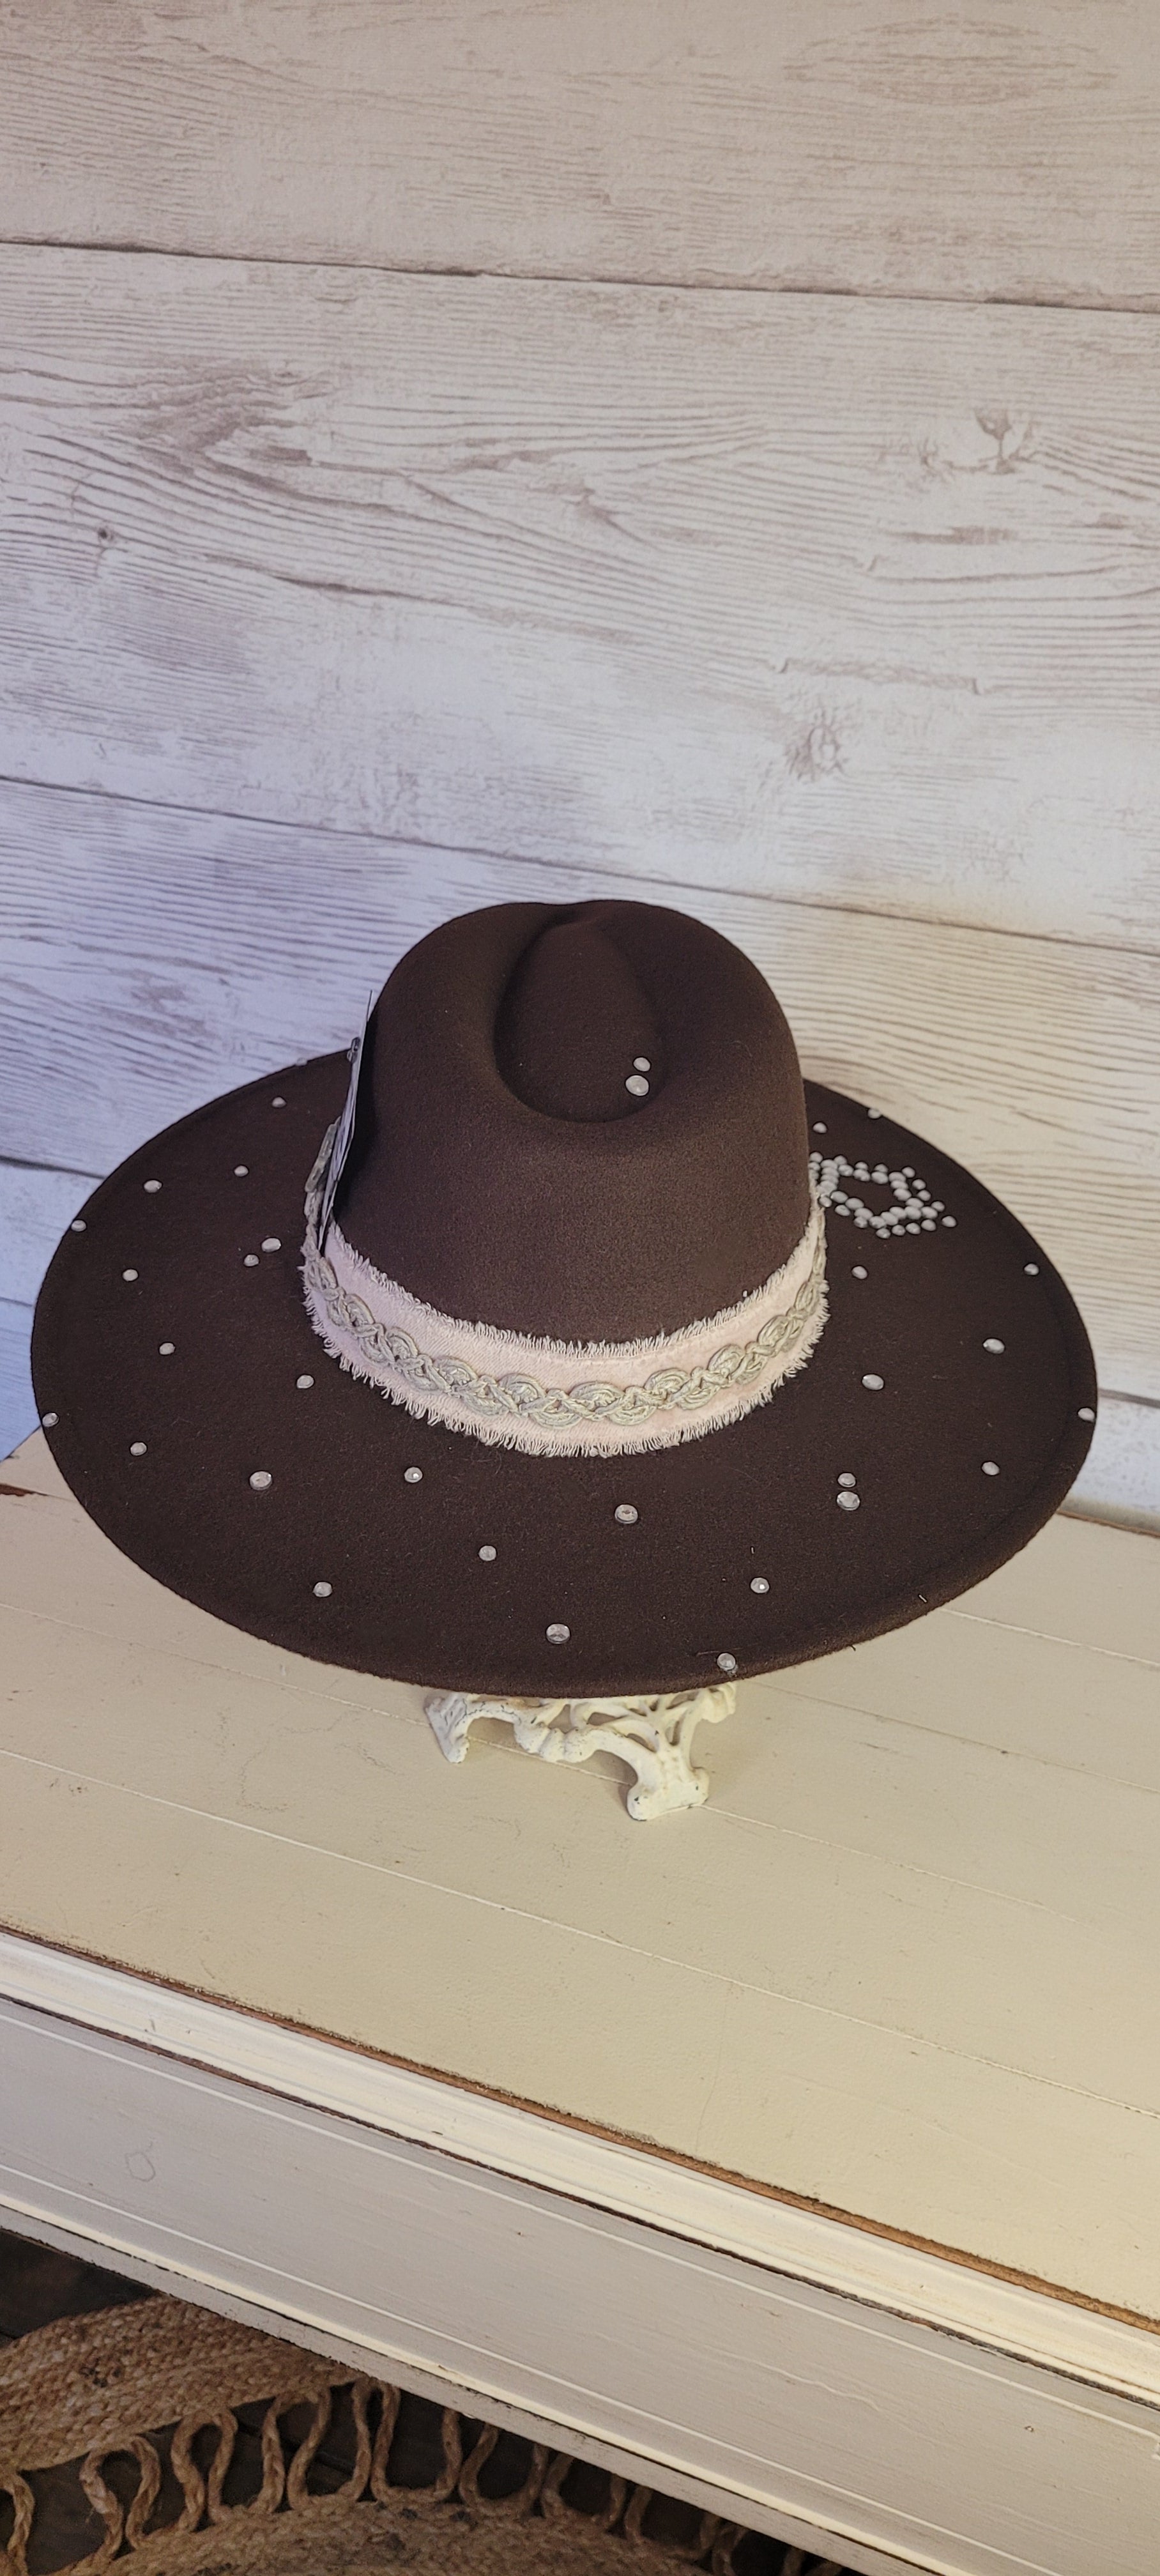 Features rhinestones, natural frayed velvet & lace ribbon, glitter star brooch & playing card Felt hat Flat brim 100% polyester Ribbon drawstring for hat size adjustment Head Circumference: 24" Crown Height: 5" Brim Length: 15.75" Brim Width: 14.5" Branded & numbered inside crown Custom designed by Kayla